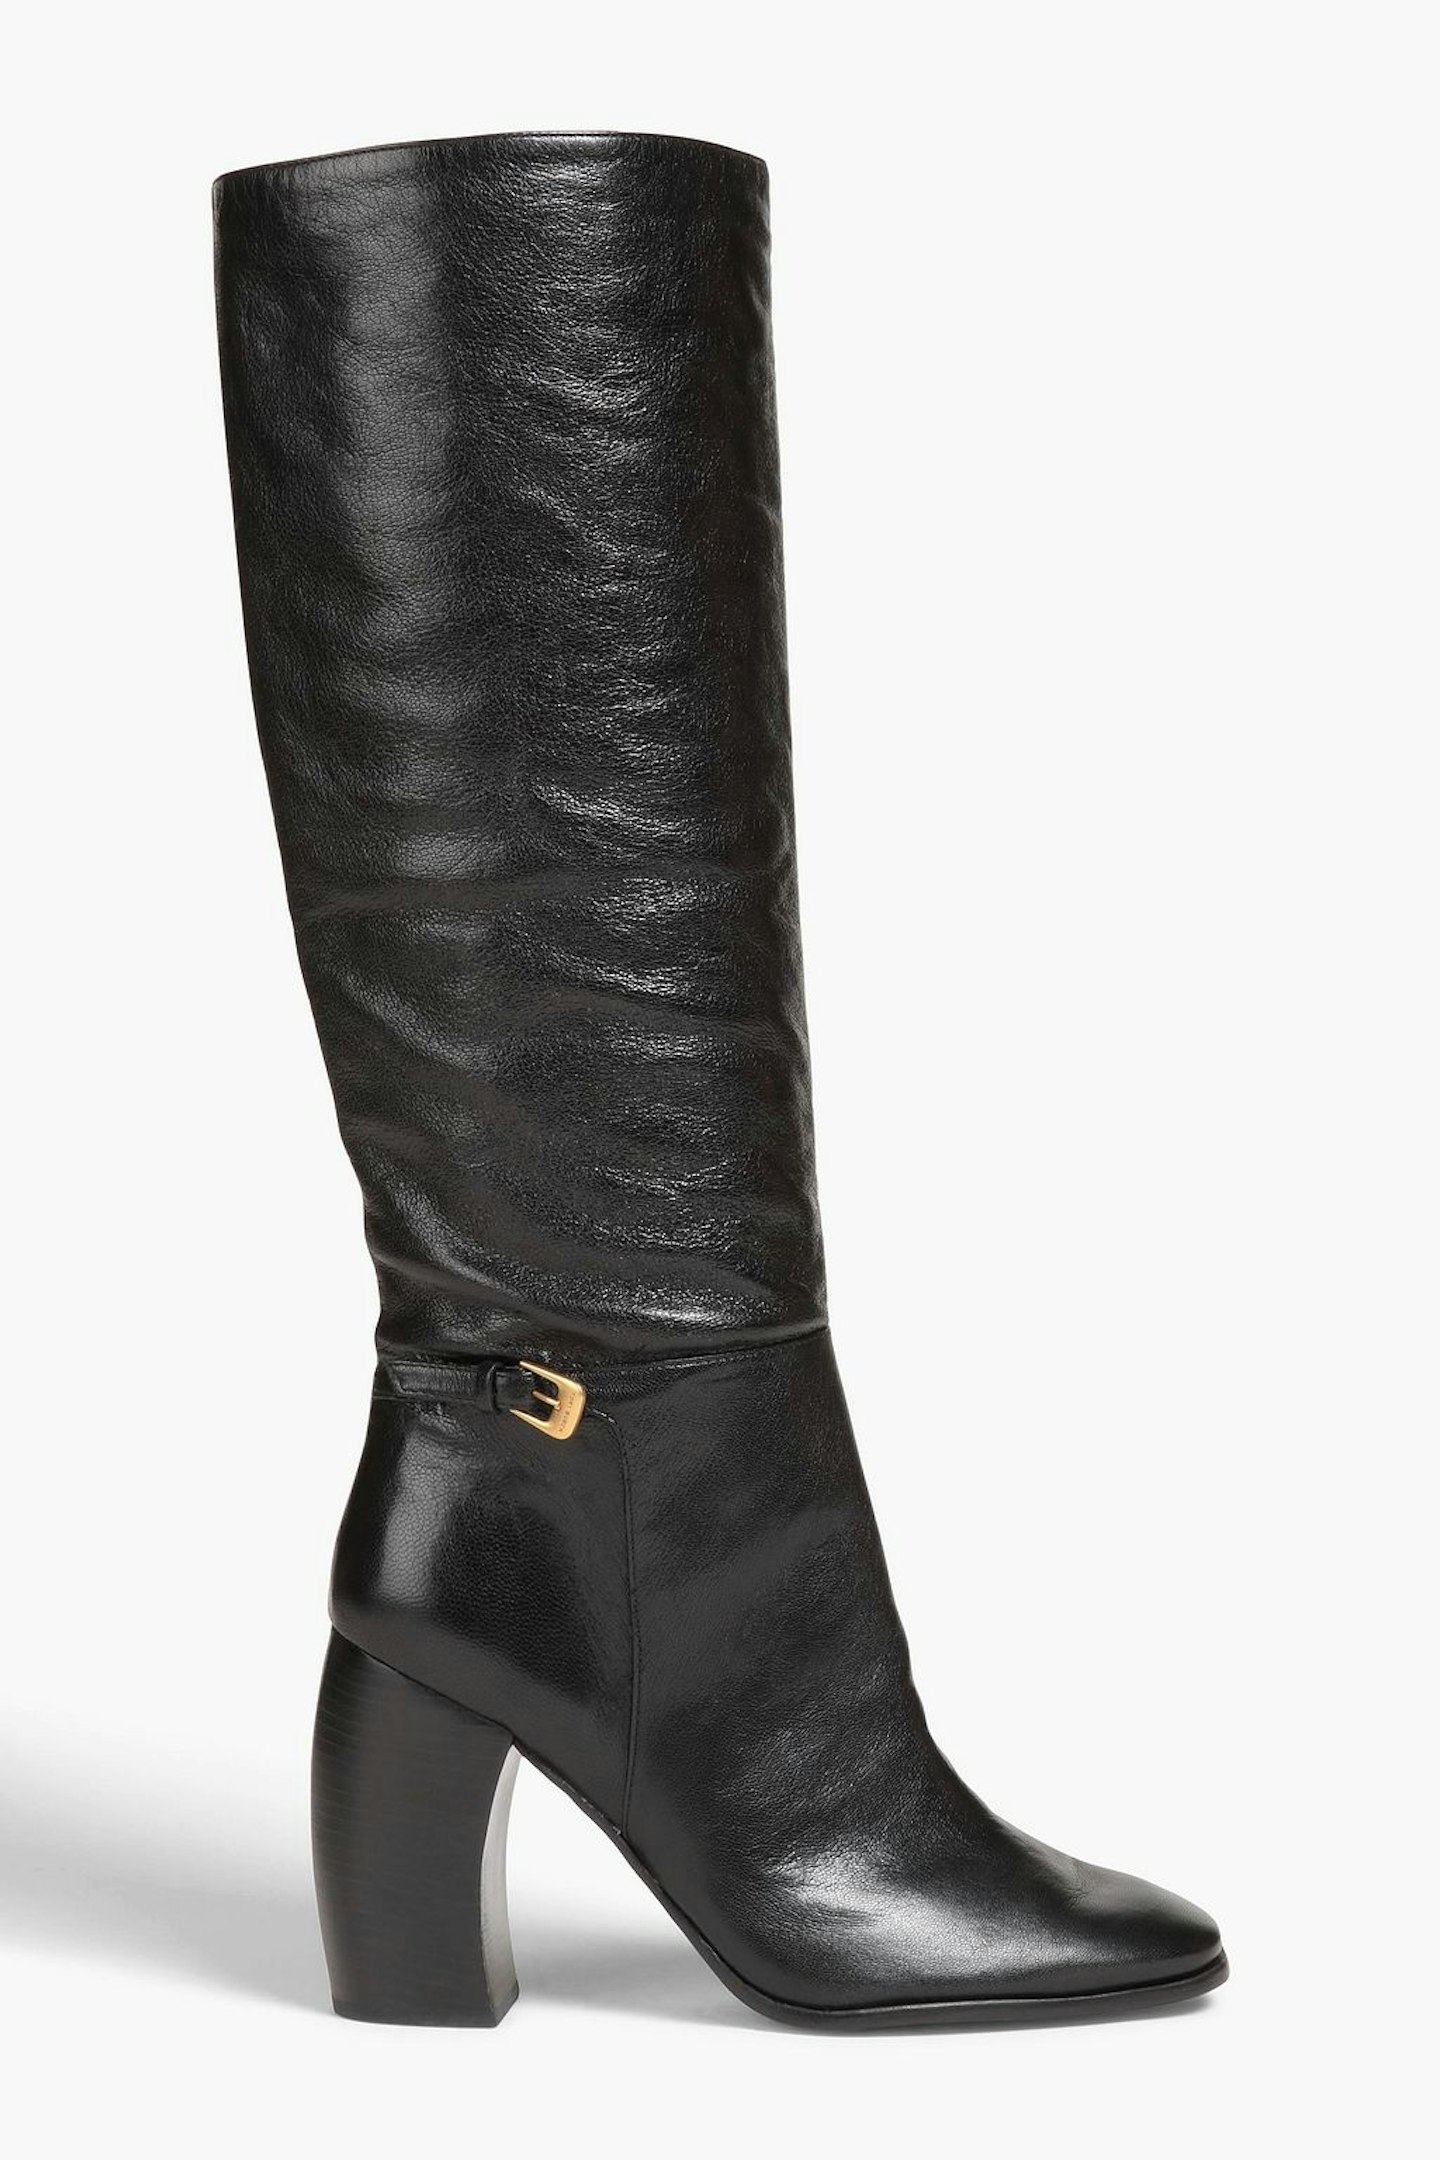 Tory Burch, Buckled Pebbled-Leather Boots